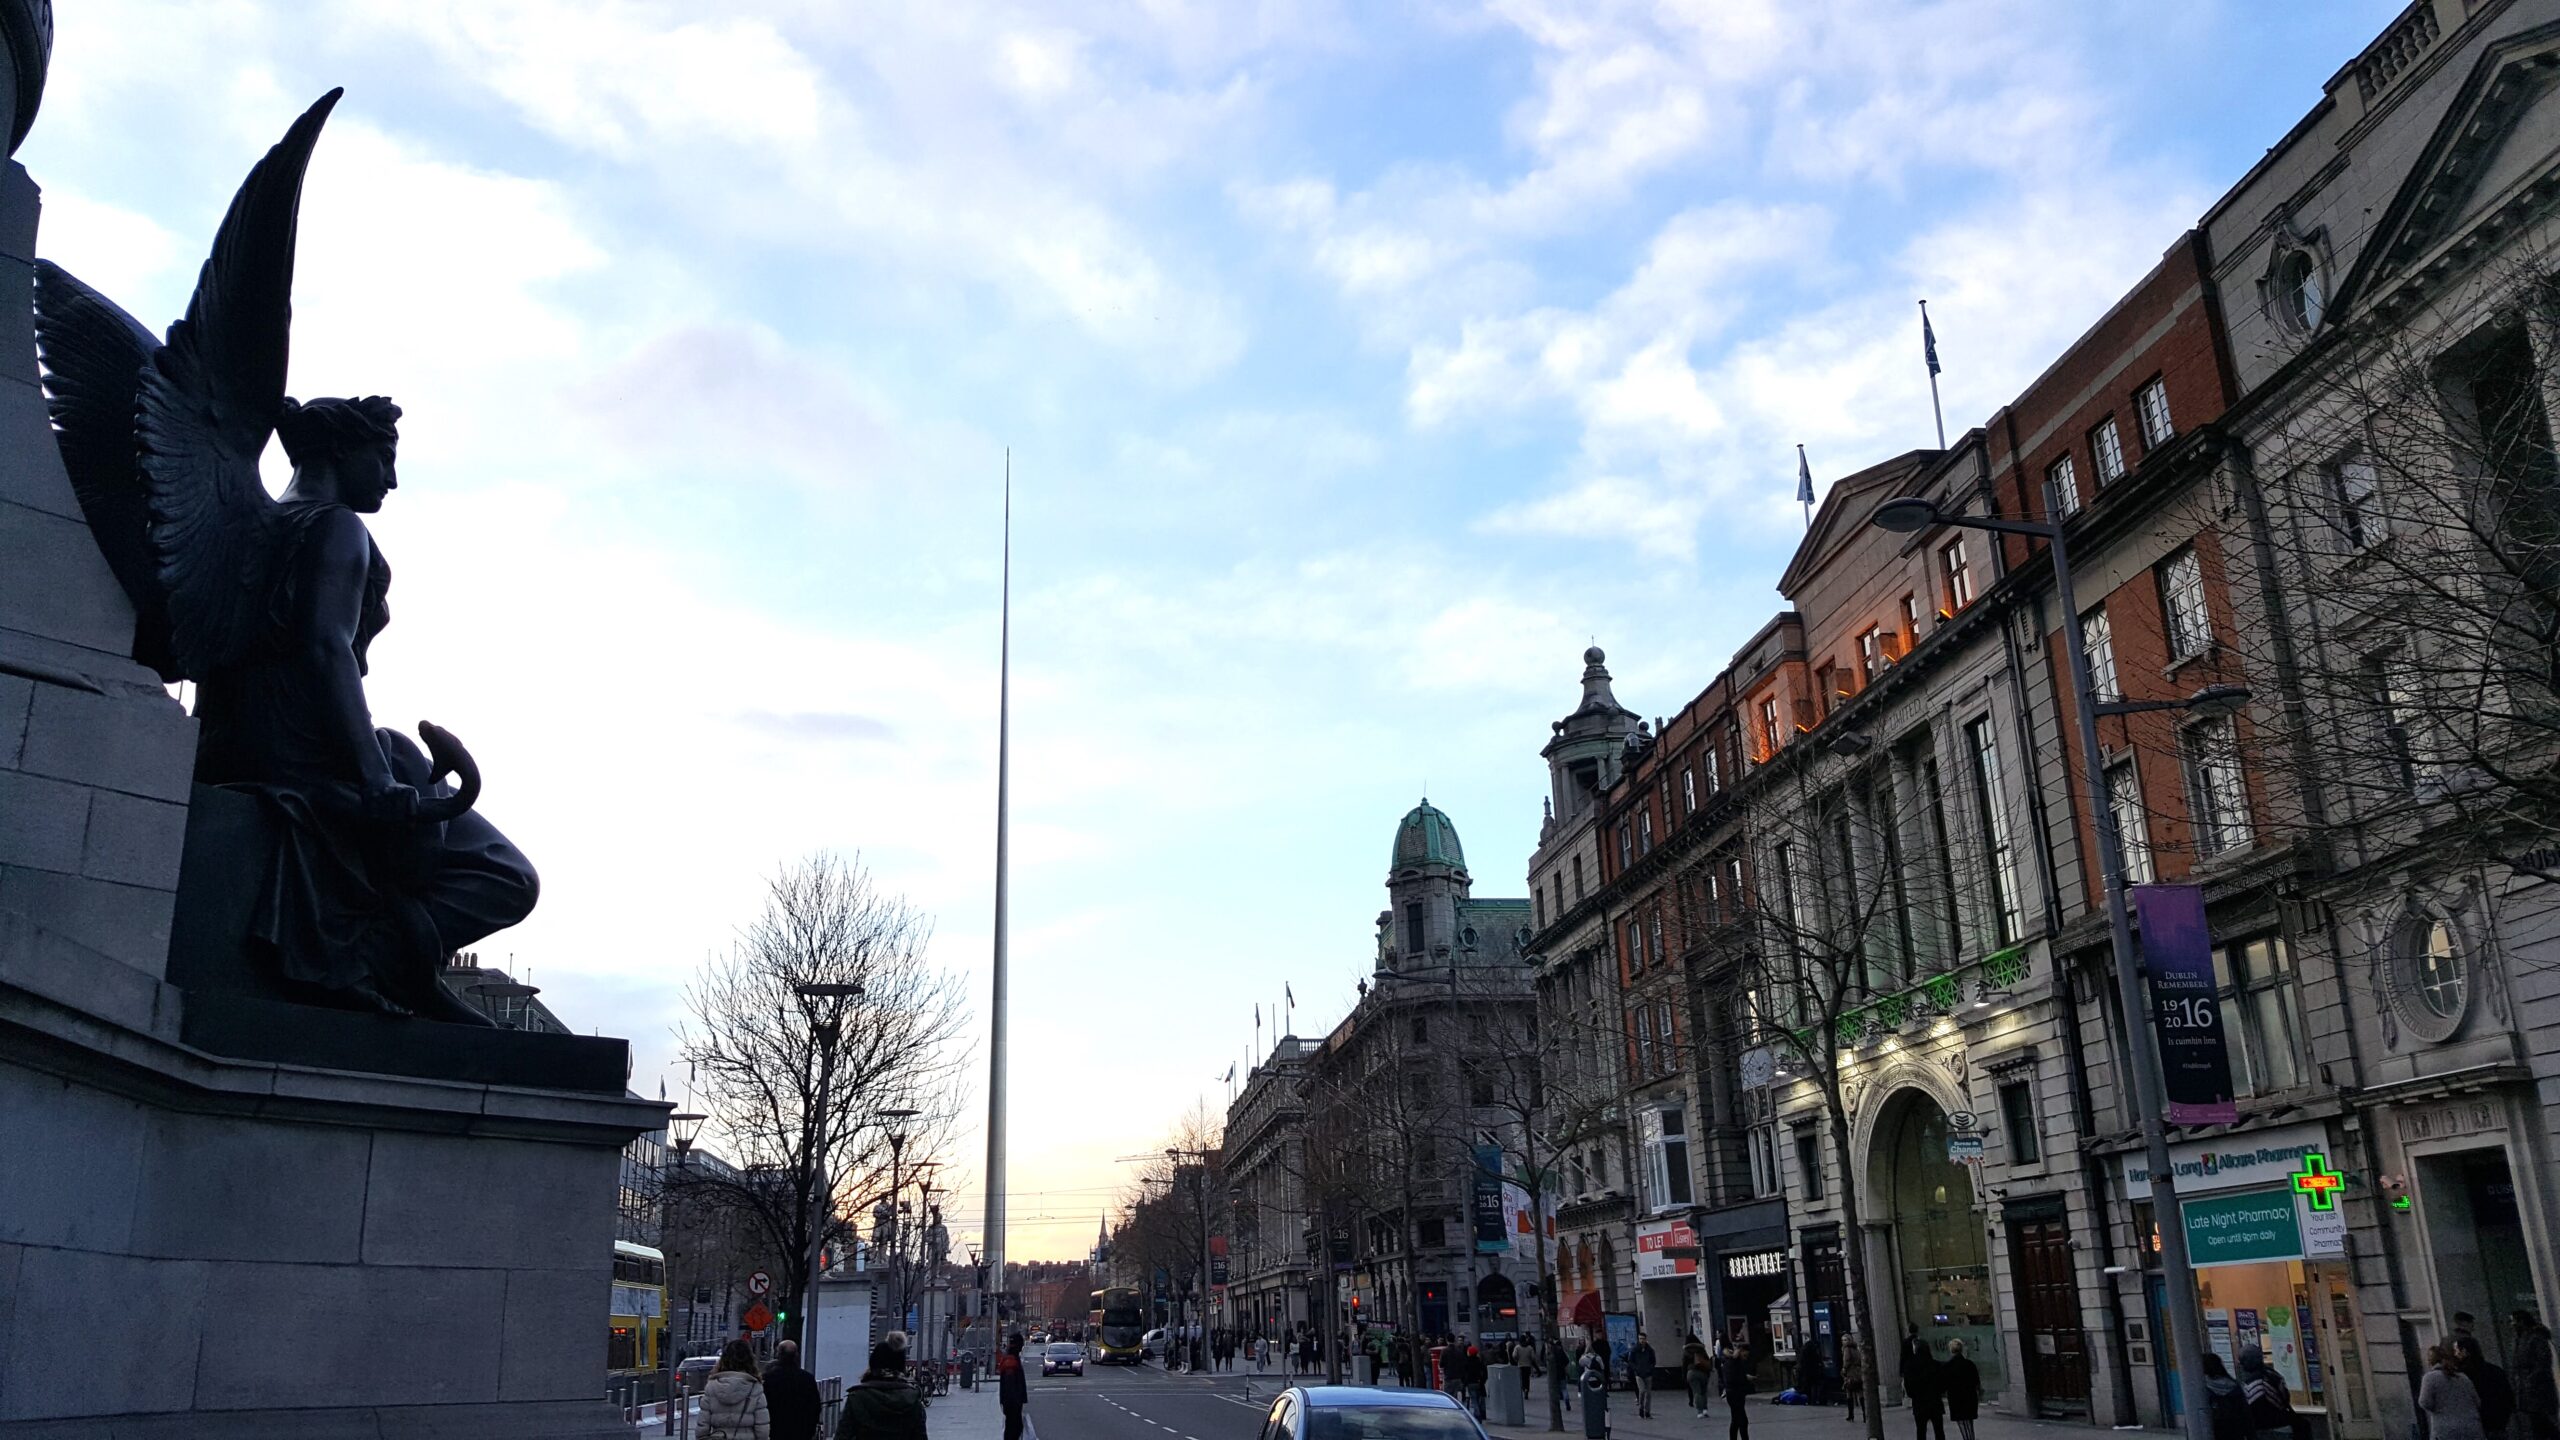 Rising Above the City: Exploring the Spire of Dublin